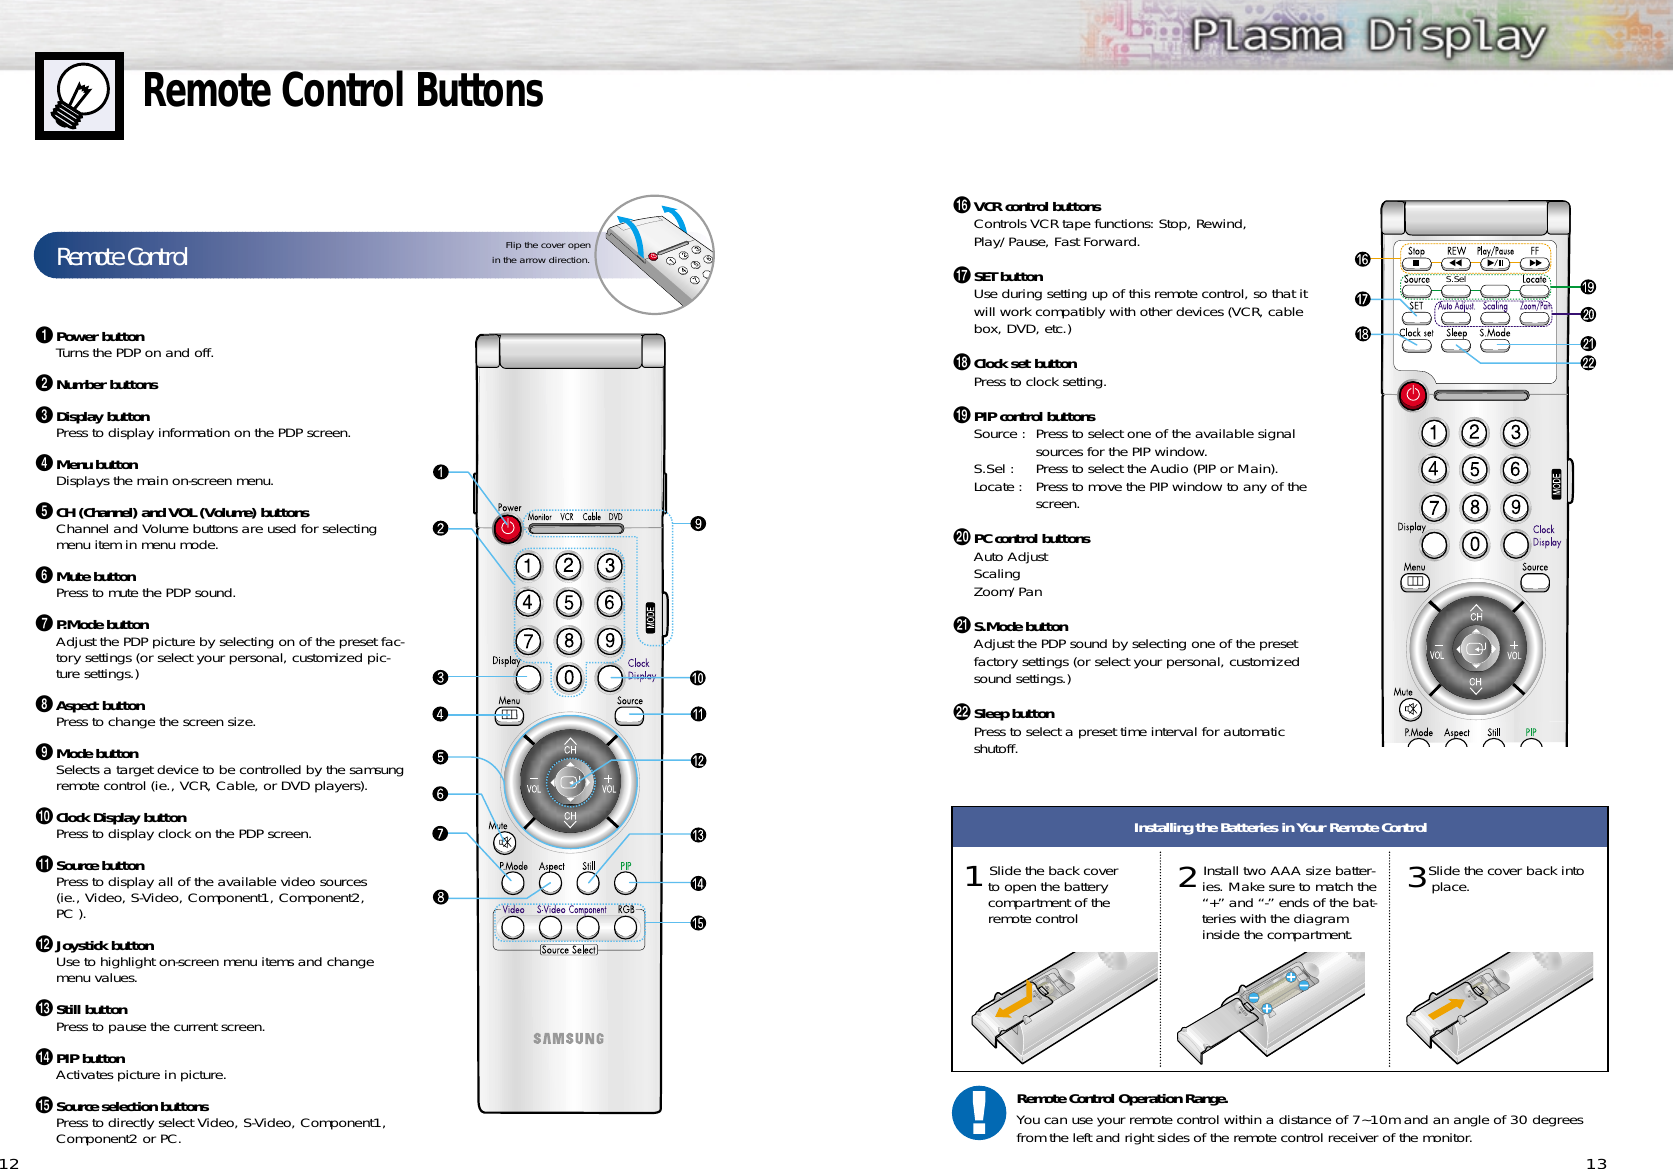 ıVCR control buttonsControls VCR tape functions: Stop, Rewind,Play/Pause, Fast Forward.˜SET buttonUse during setting up of this remote control, so that itwill work compatibly with other devices (VCR, cablebox, DVD, etc.)¯Clock set buttonPress to clock setting.˘PIP control buttonsSource : Press to select one of the available signalsources for the PIP window.S.Sel : Press to select the Audio (PIP or Main).Locate : Press to move the PIP window to any of thescreen.¿PC control buttonsAuto AdjustScalingZoom/Pan¸S.Mode buttonAdjust the PDP sound by selecting one of the presetfactory settings (or select your personal, customizedsound settings.)˛Sleep buttonPress to select a preset time interval for automatic shutoff.S.Sel13Remote Control ButtonsŒPower buttonTurns the PDP on and off.´Number buttonsˇDisplay buttonPress to display information on the PDP screen.¨Menu buttonDisplays the main on-screen menu.ˆCH (Channel) and VOL (Volume) buttonsChannel and Volume buttons are used for selectingmenu item in menu mode.ØMute buttonPress to mute the PDP sound.∏P.Mode buttonAdjust the PDP picture by selecting on of the preset fac-tory settings (or select your personal, customized pic-ture settings.)”Aspect buttonPress to change the screen size.’Mode buttonSelects a target device to be controlled by the samsungremote control (ie., VCR, Cable, or DVD players).˝Clock Display buttonPress to display clock on the PDP screen.ÔSource buttonPress to display all of the available video sources (ie., Video, S-Video, Component1, Component2, PC ).Joystick buttonUse to highlight on-screen menu items and changemenu values.ÒStill buttonPress to pause the current screen.ÚPIP buttonActivates picture in picture.ÆSource selection buttonsPress to directly select Video, S-Video, Component1,Component2 or PC. 12Remote ControlFlip the cover openin the arrow direction.Installing the Batteries in Your Remote Control1Slide the back coverto open the batterycompartment of theremote control3Slide the cover back intoplace.2Install two AAA size batter-ies. Make sure to match the“+” and “-” ends of the bat-teries with the diagraminside the compartment.Remote Control Operation Range.You can use your remote control within a distance of 7~10m and an angle of 30 degreesfrom the left and right sides of the remote control receiver of the monitor.